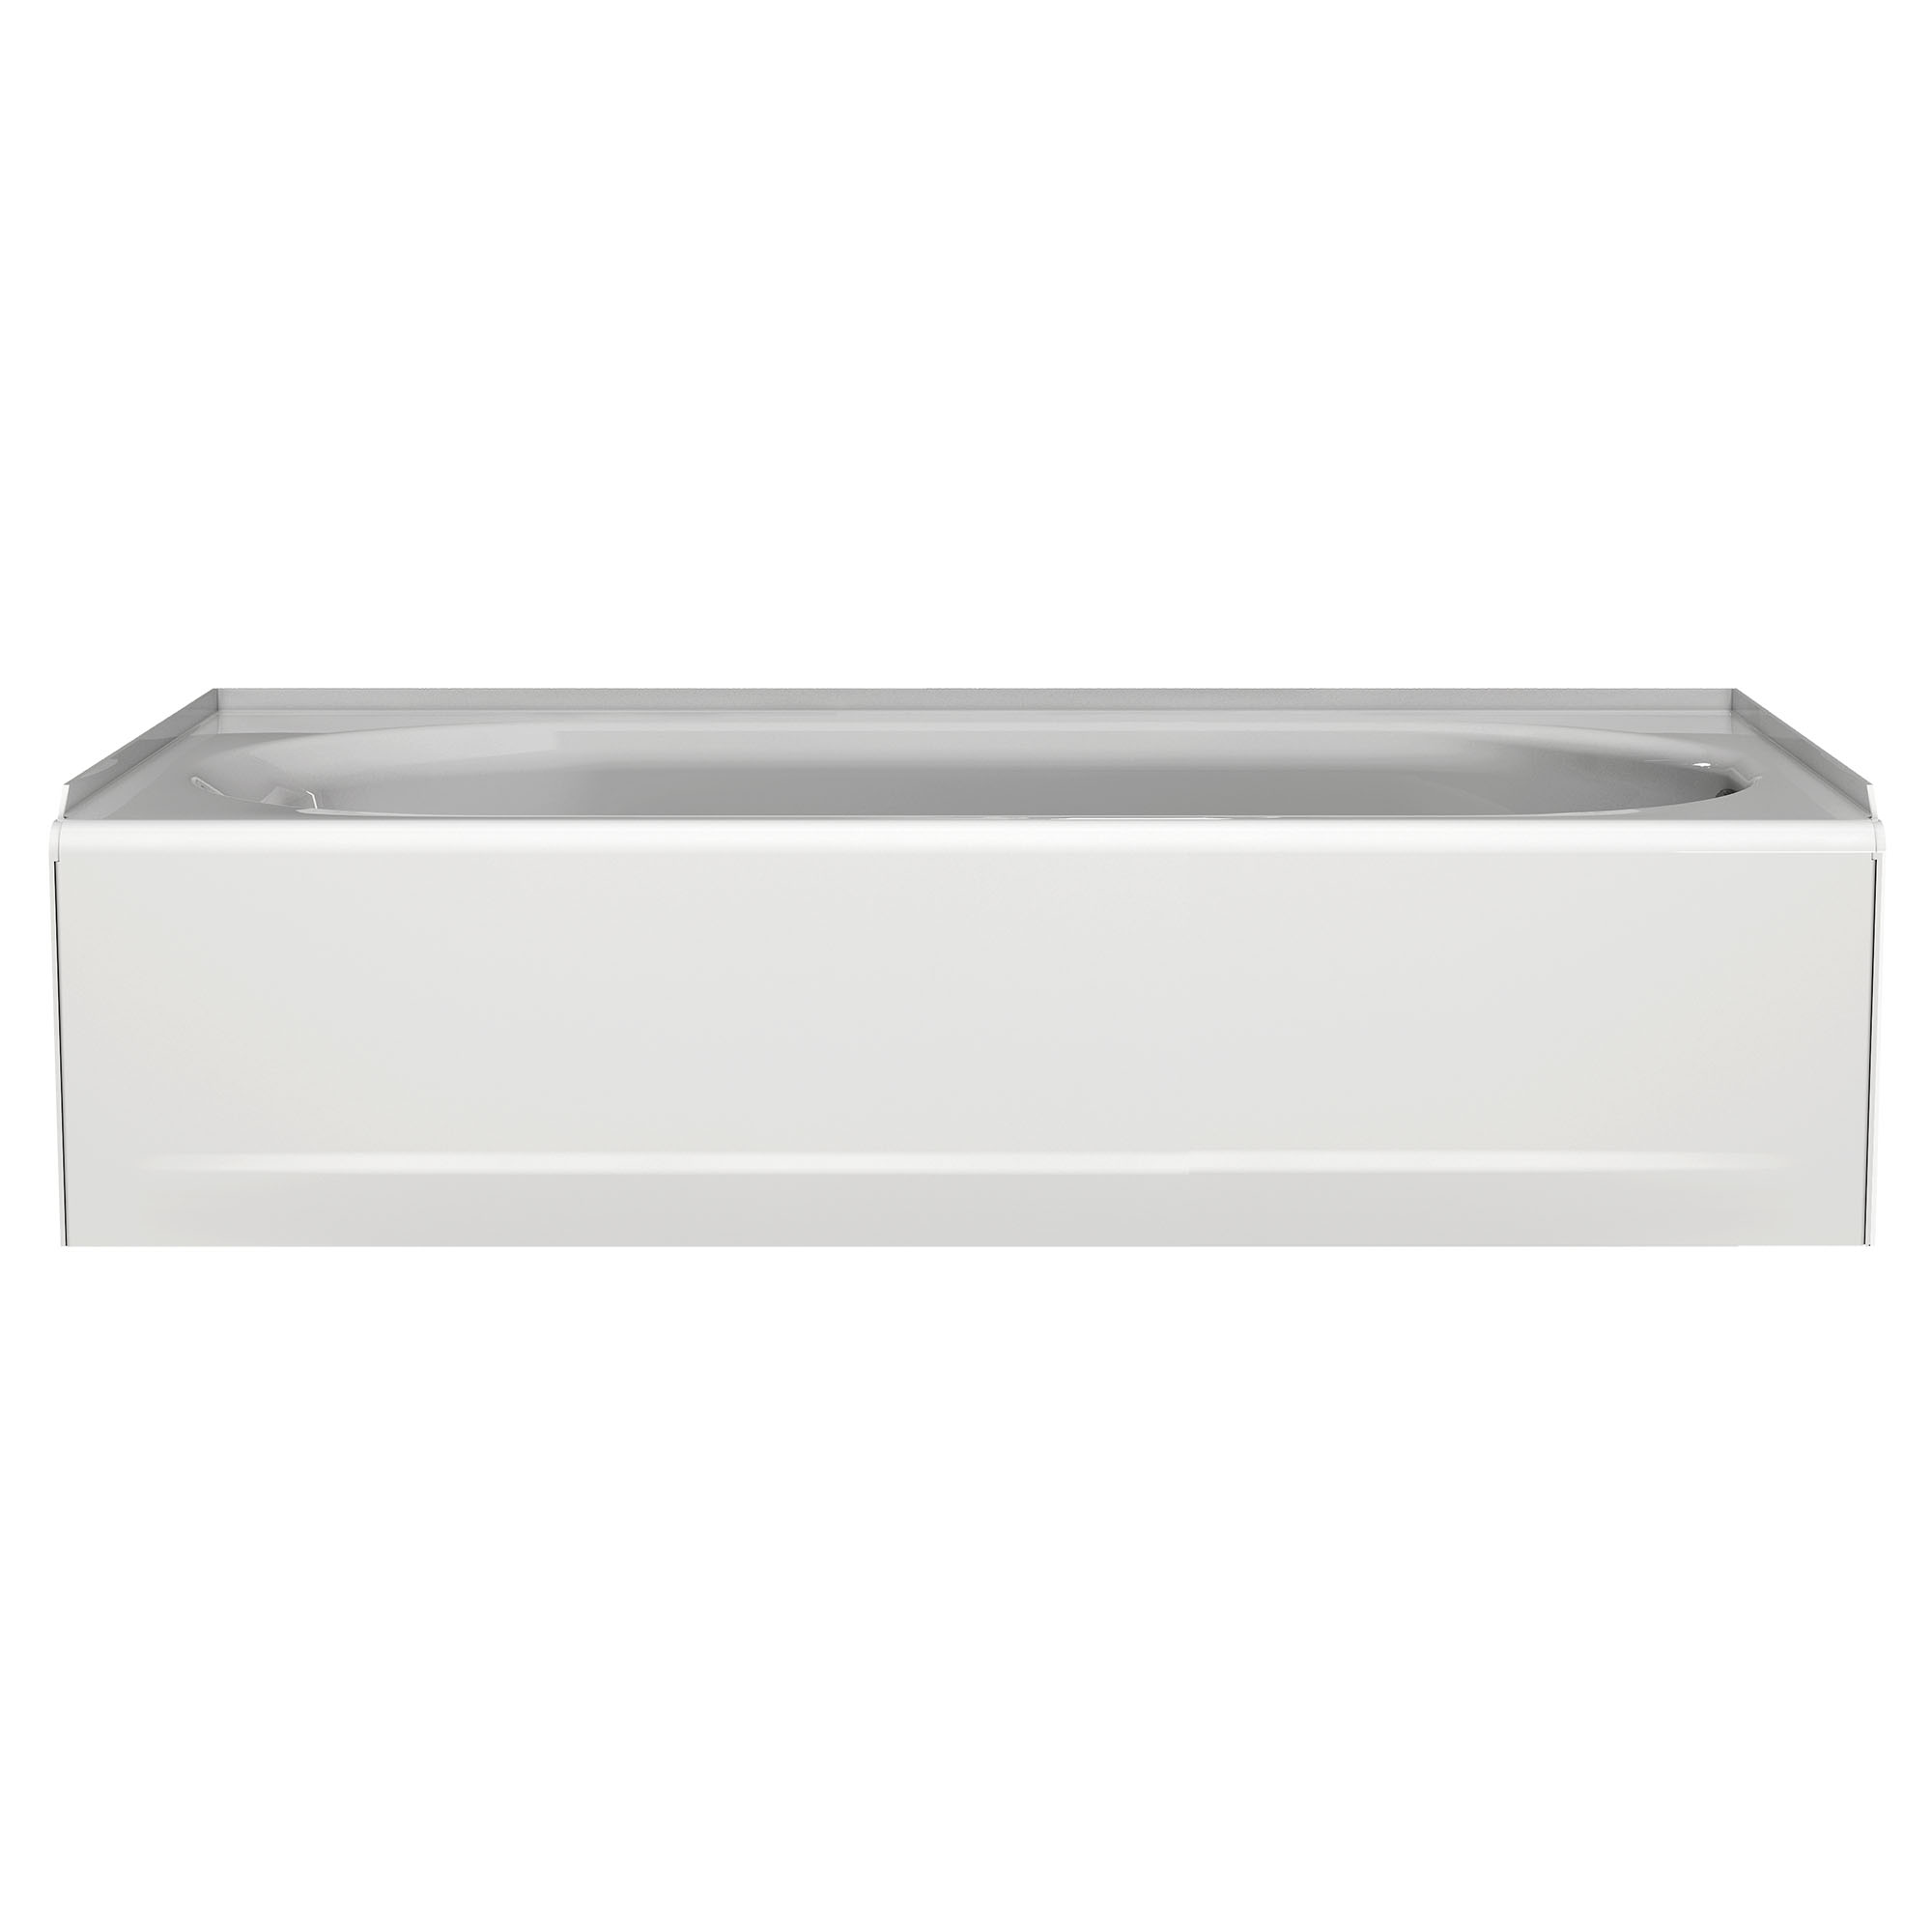 Princeton® Americast® 60 x 34-Inch Integral Apron Bathtub Right-Hand Outlet Luxury Ledge with Integral Drain